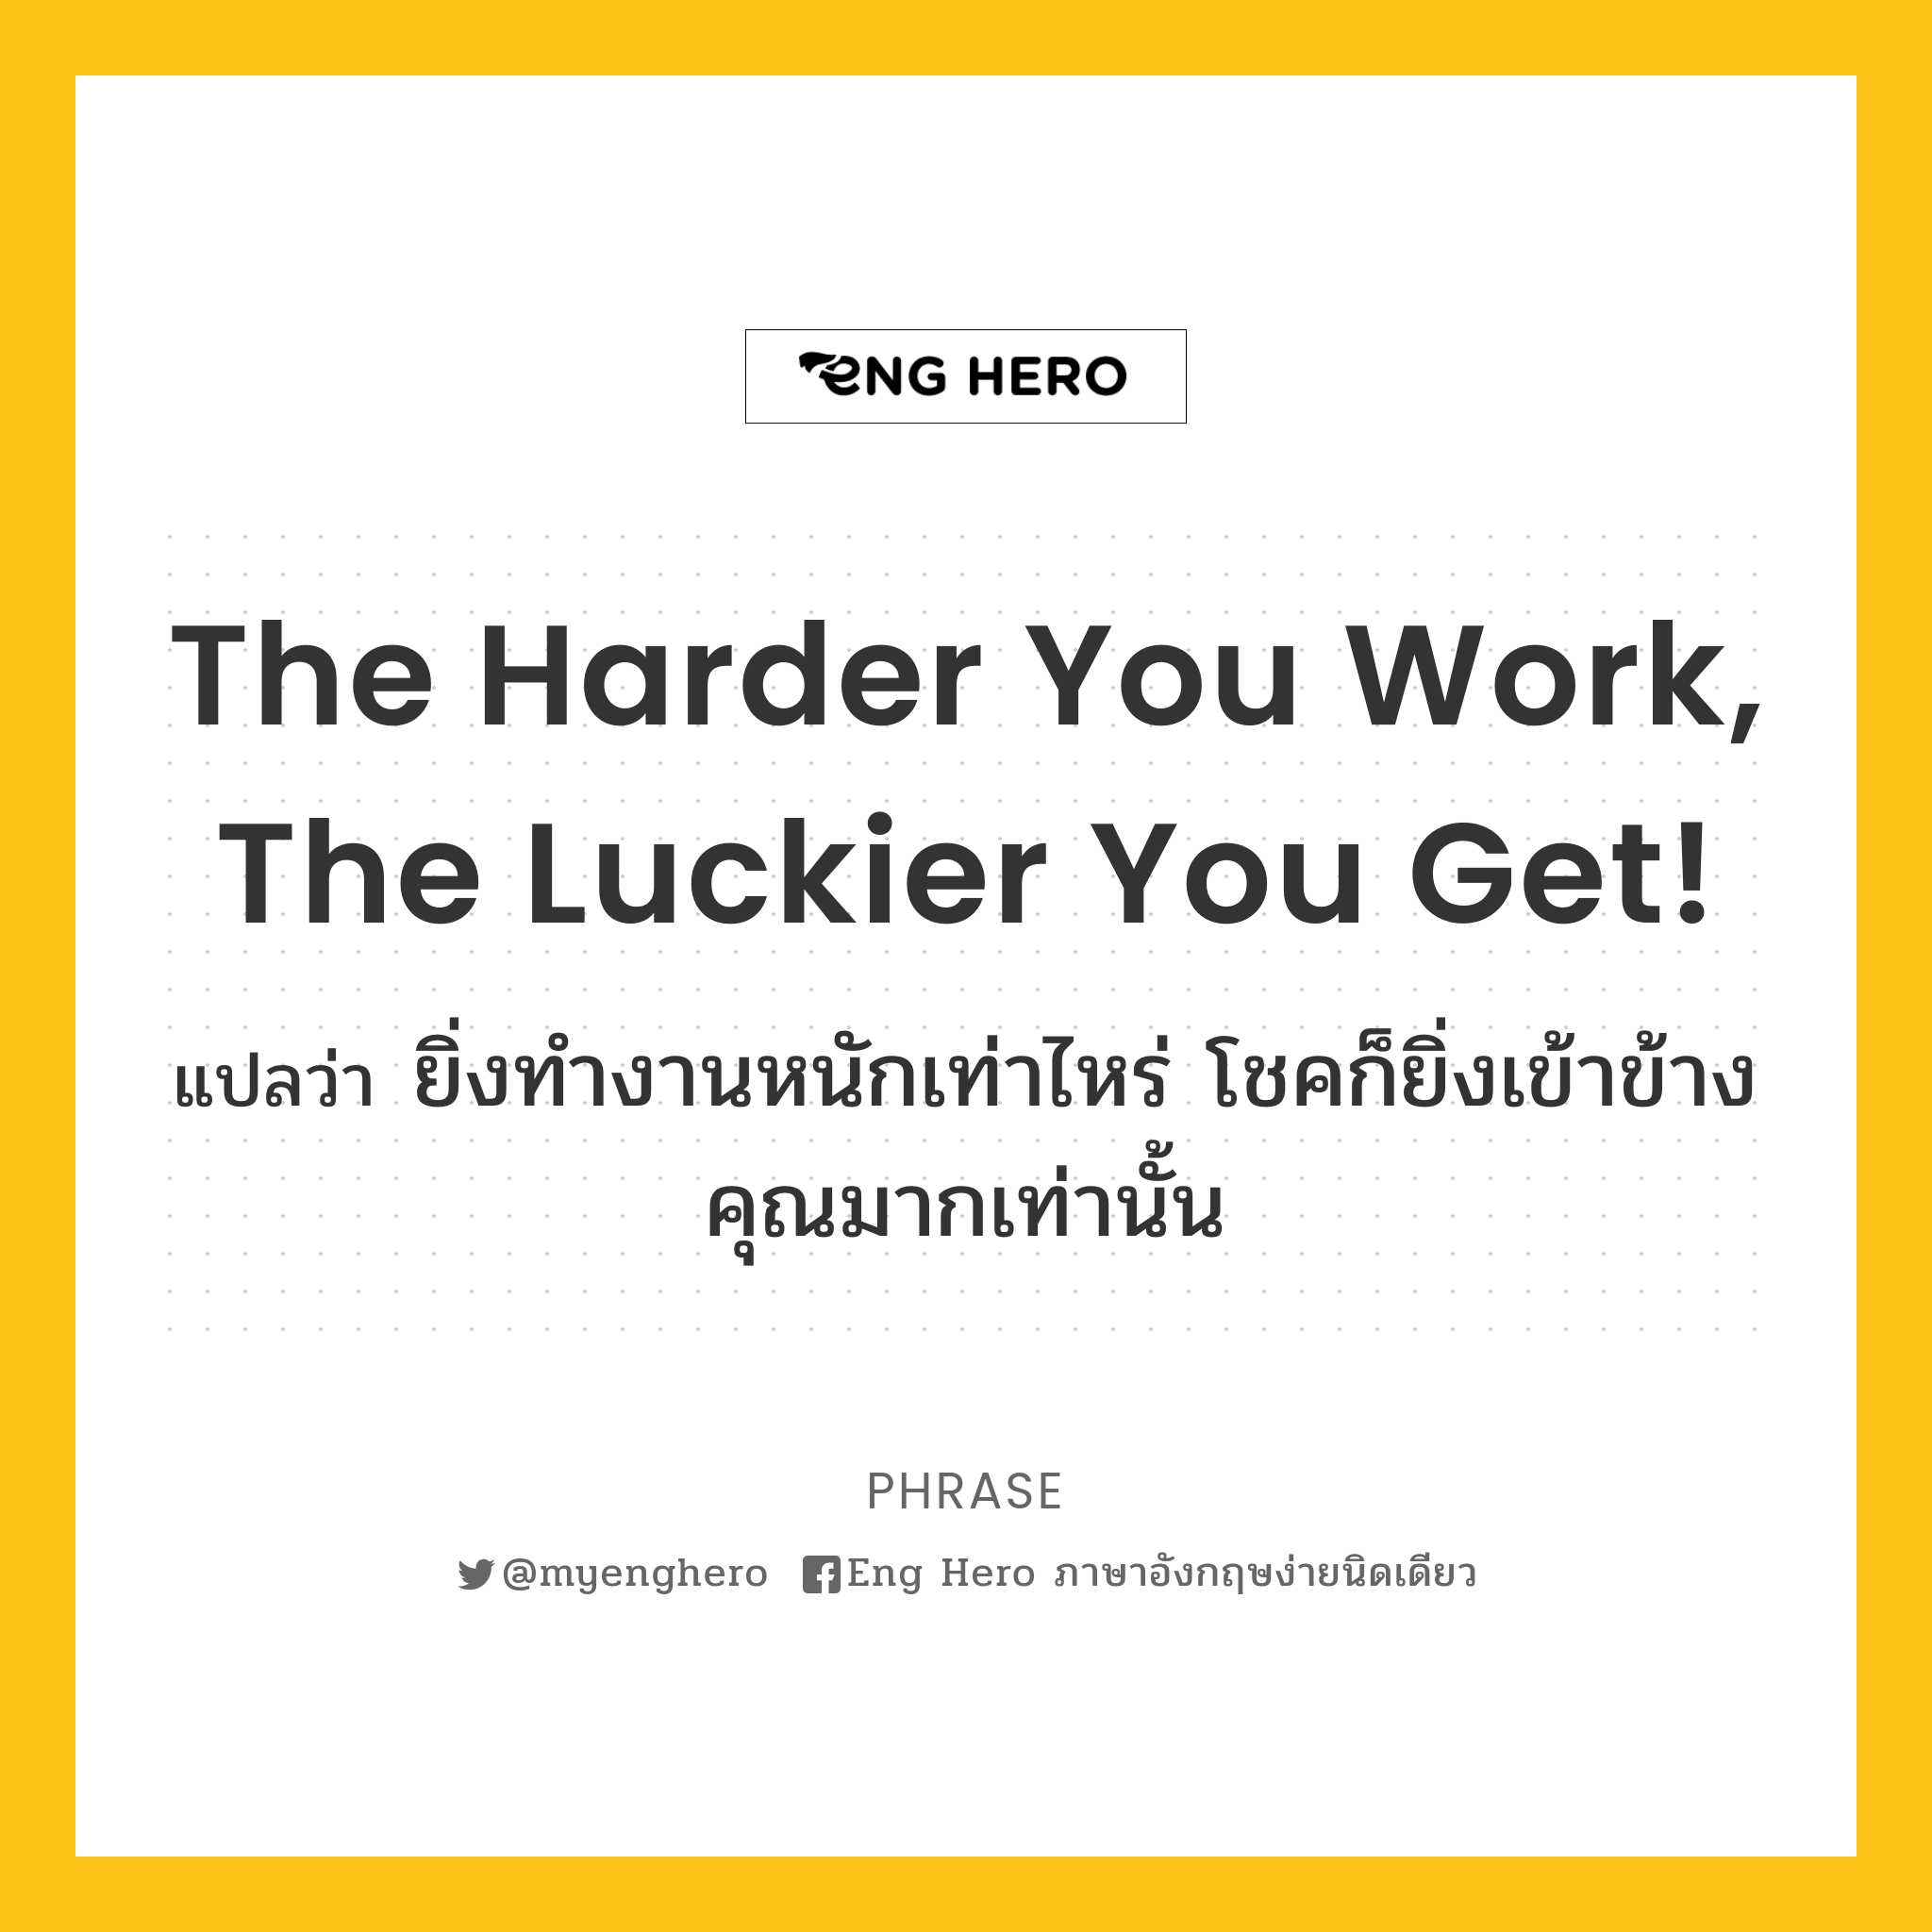 The harder you work, the luckier you get!